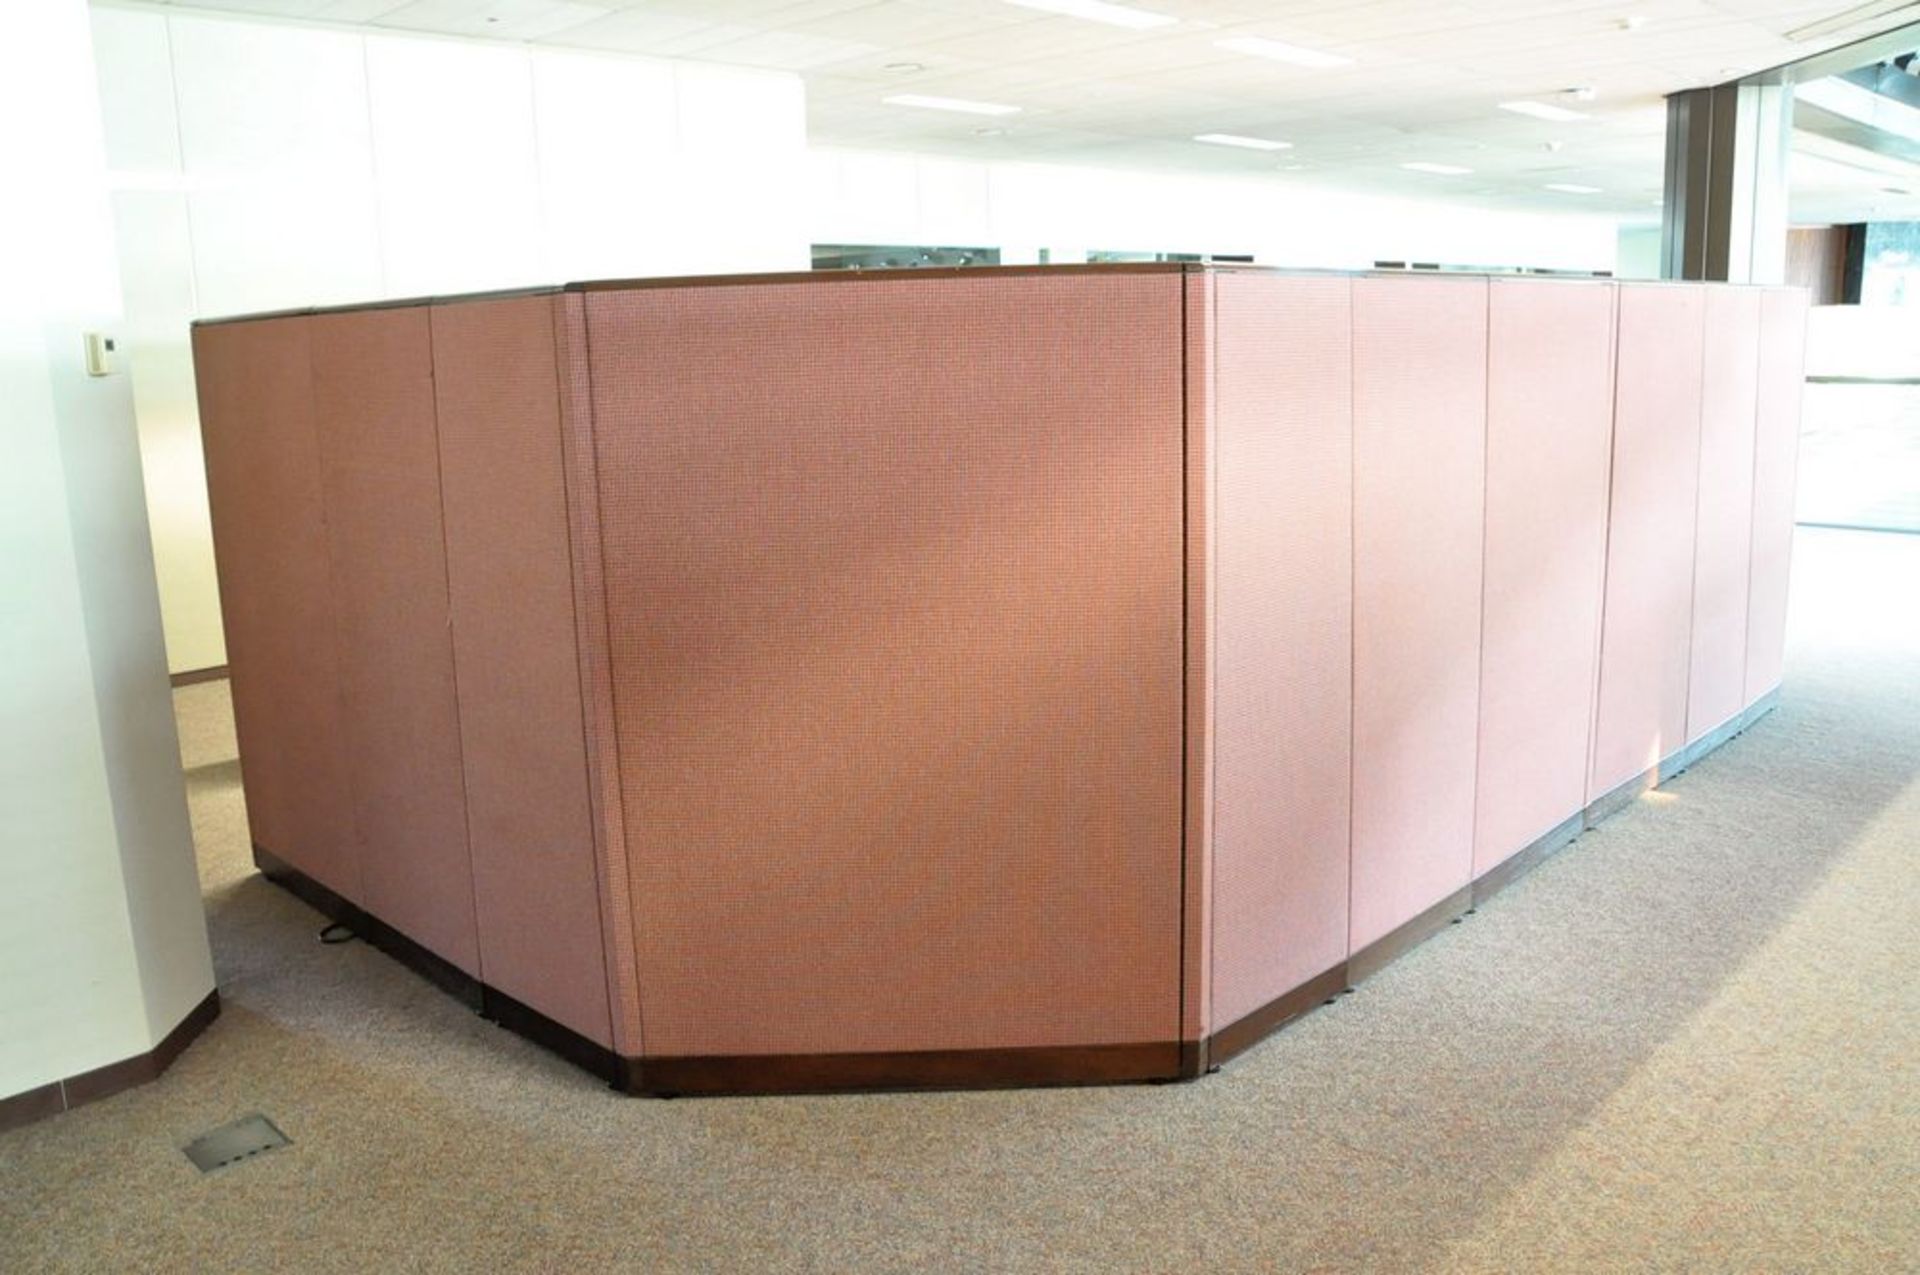 Lot-(6) Station Cubical Partition Work System with Furniture, (Atrium Edge), (4th Floor) - Image 5 of 16